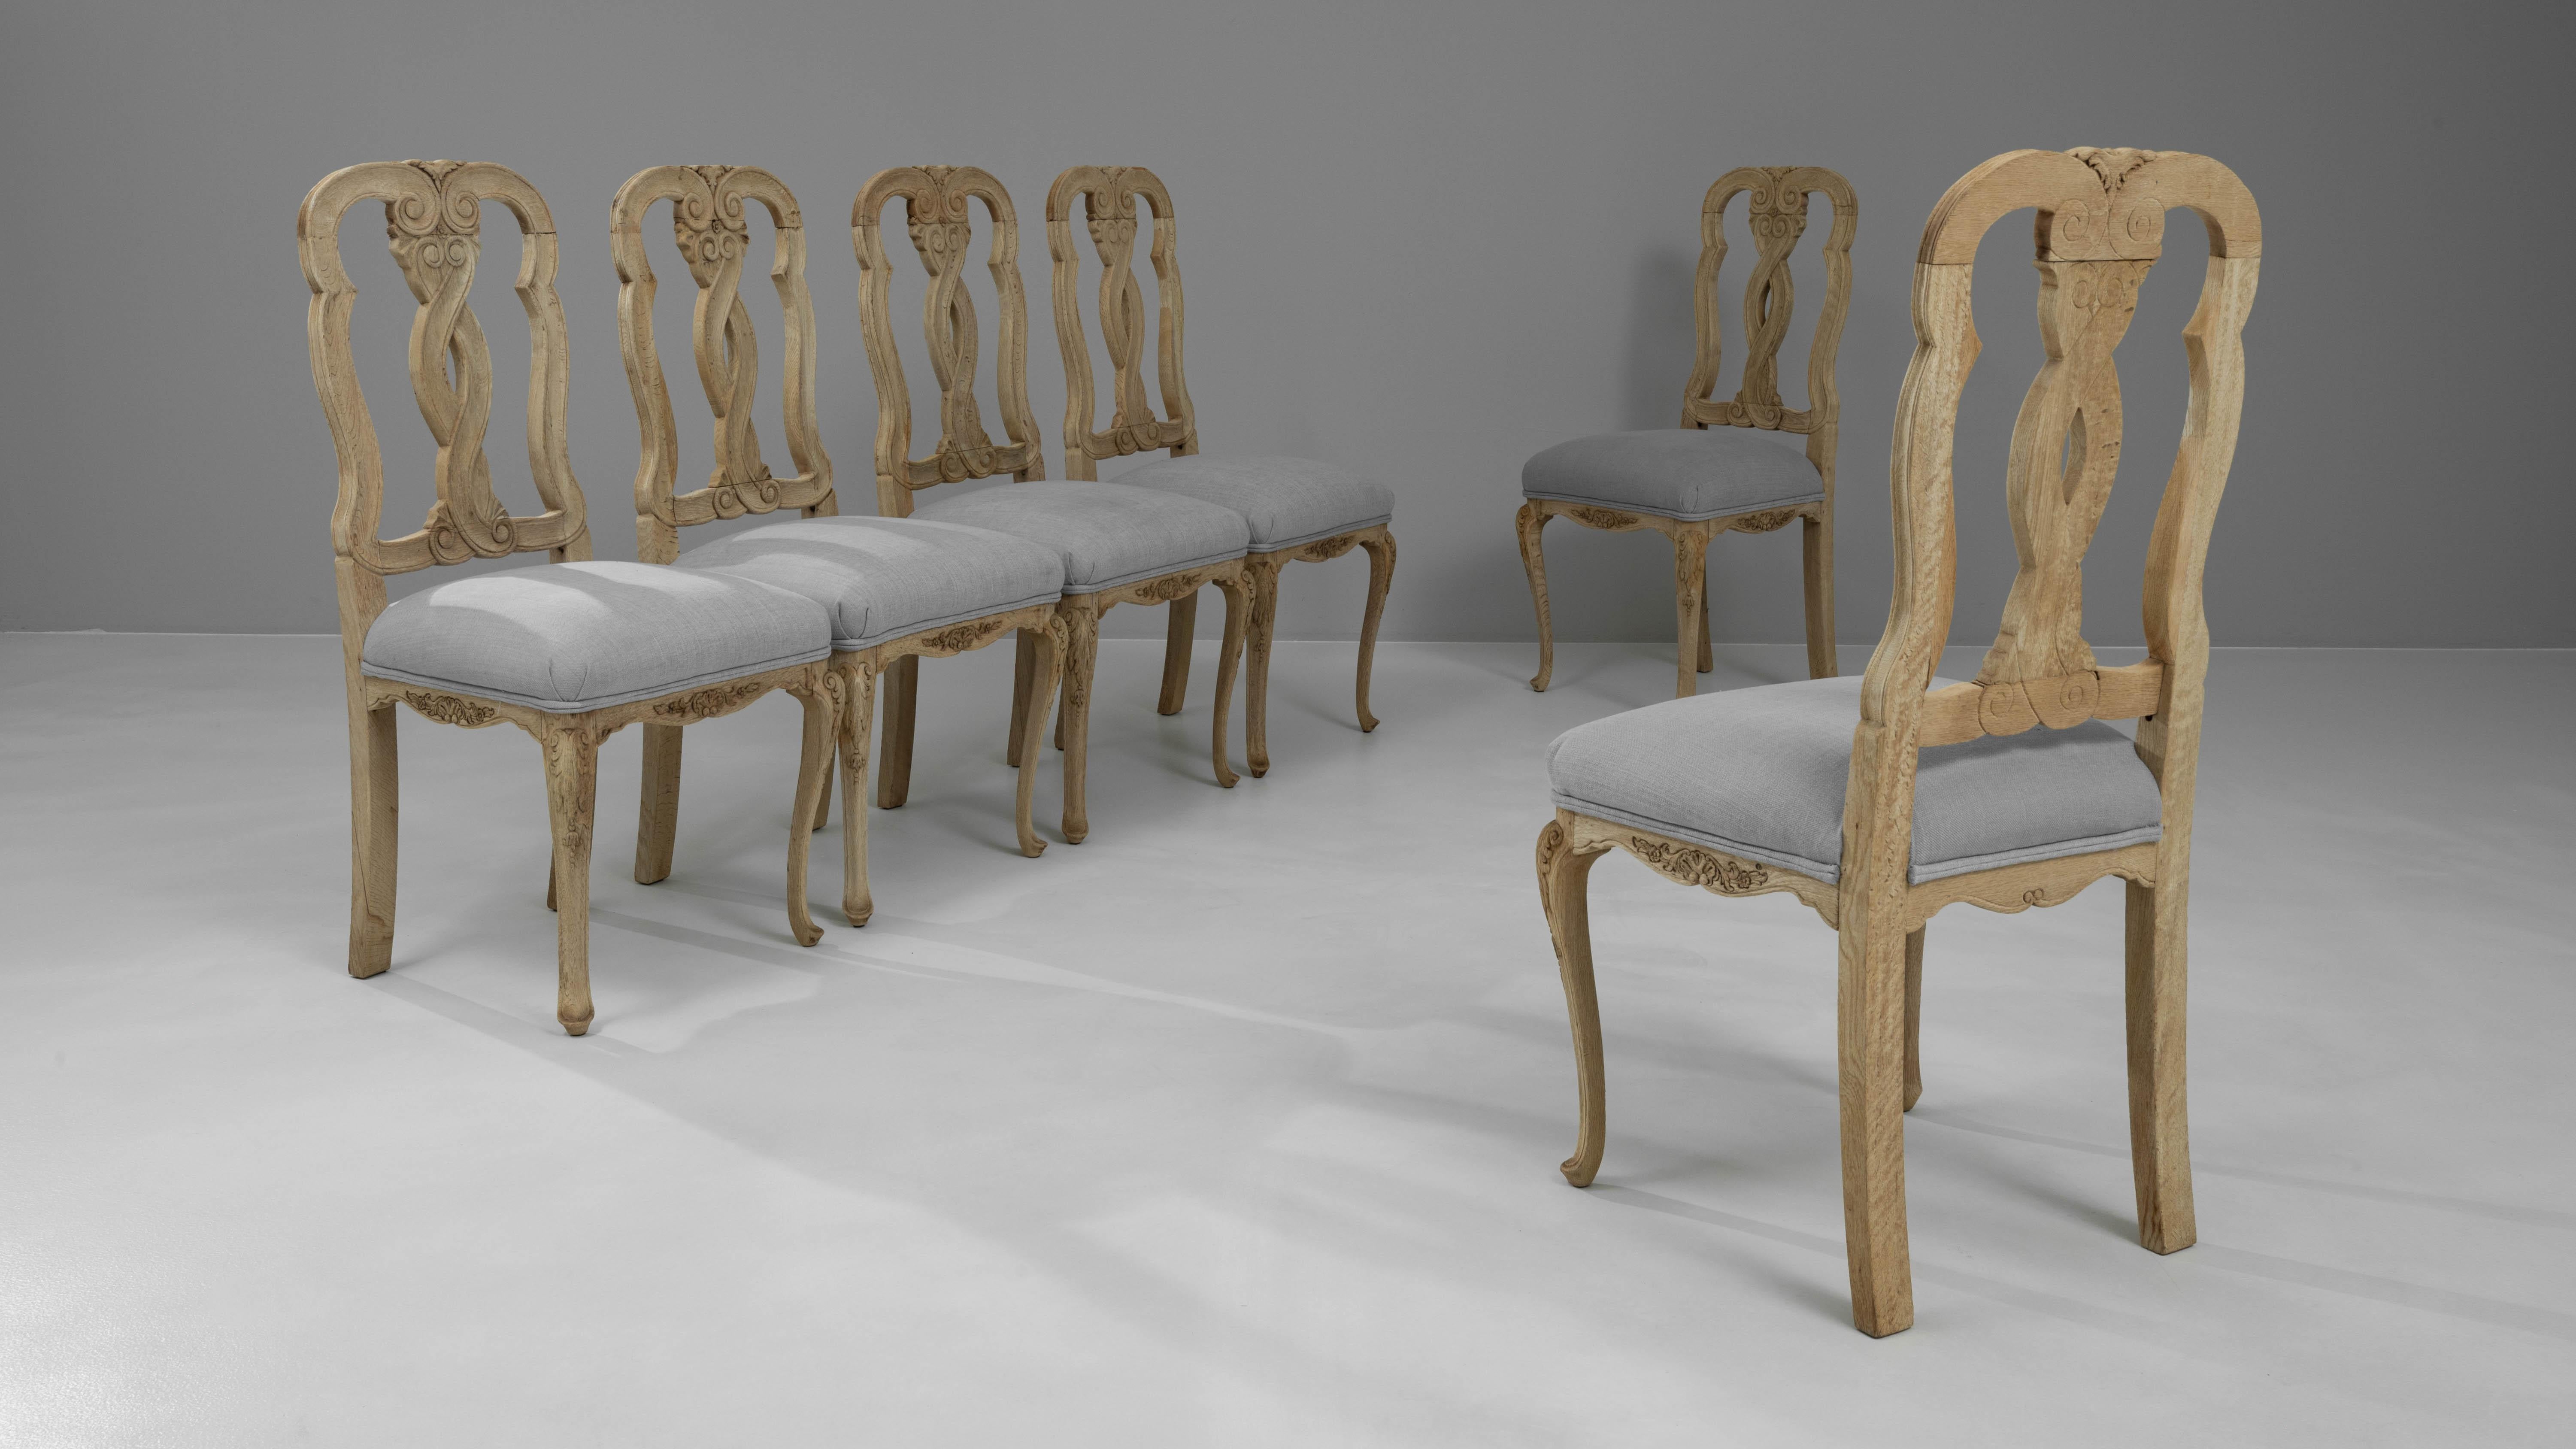 20th Century French Bleached Oak Dining Chairs With Upholstered Seats, Set of 6 In Good Condition For Sale In High Point, NC